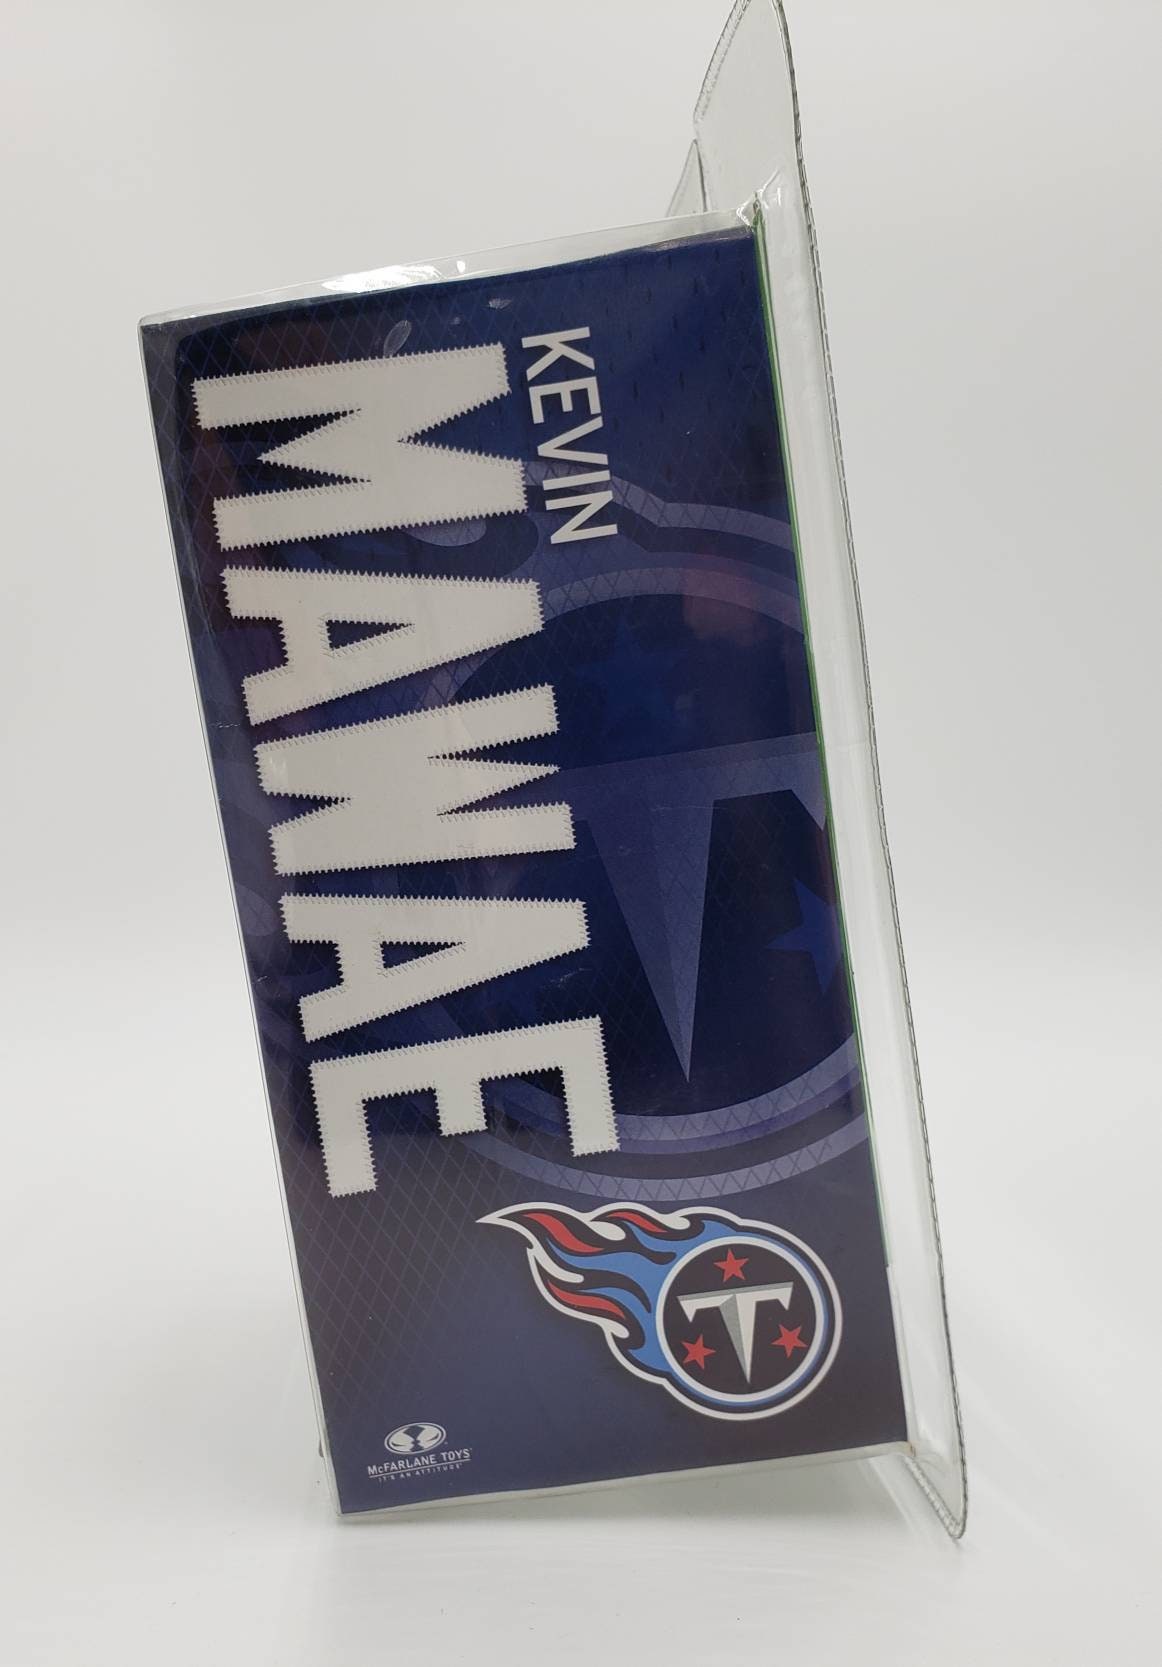 McFarlane Kevin Mawae Tennessee Titans Blue Series 13 Collectable NFL Action Figure Vintage Football Figurine Perfect Birthday Gift